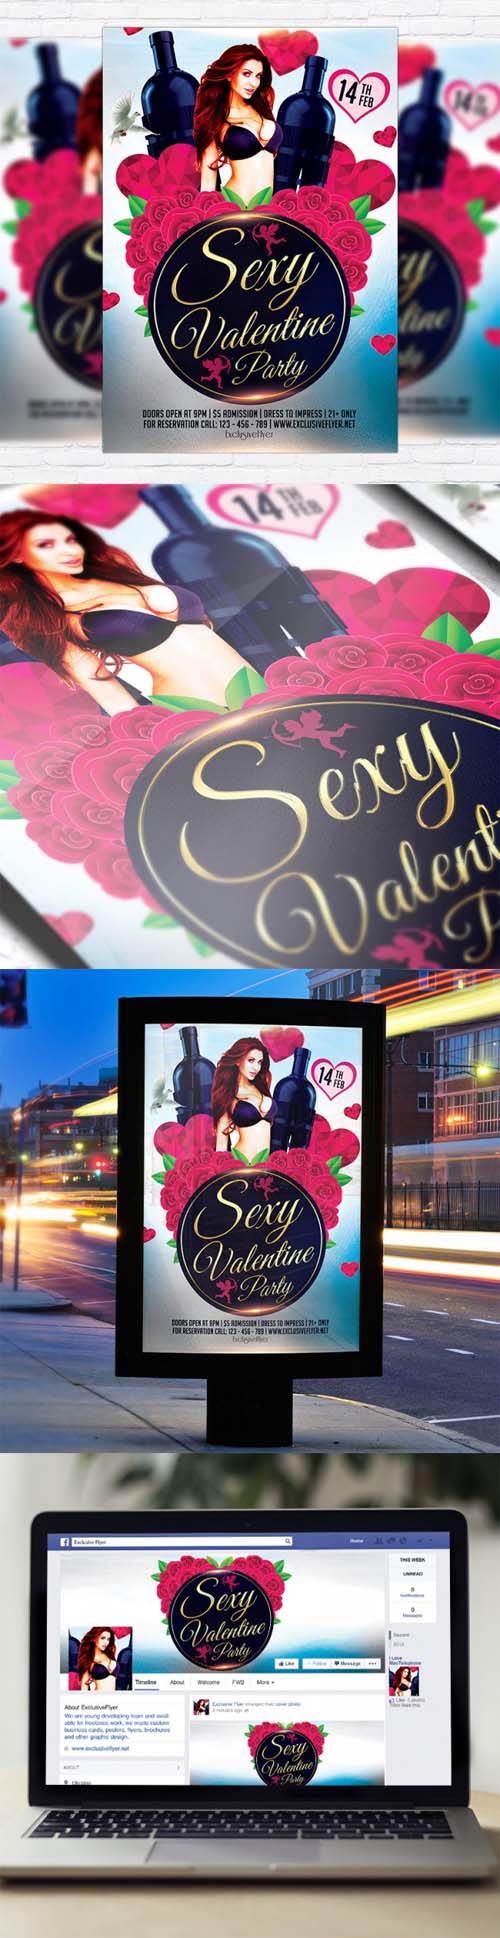 Flyer Template - Sexy Valentine + Facebook Cover 9